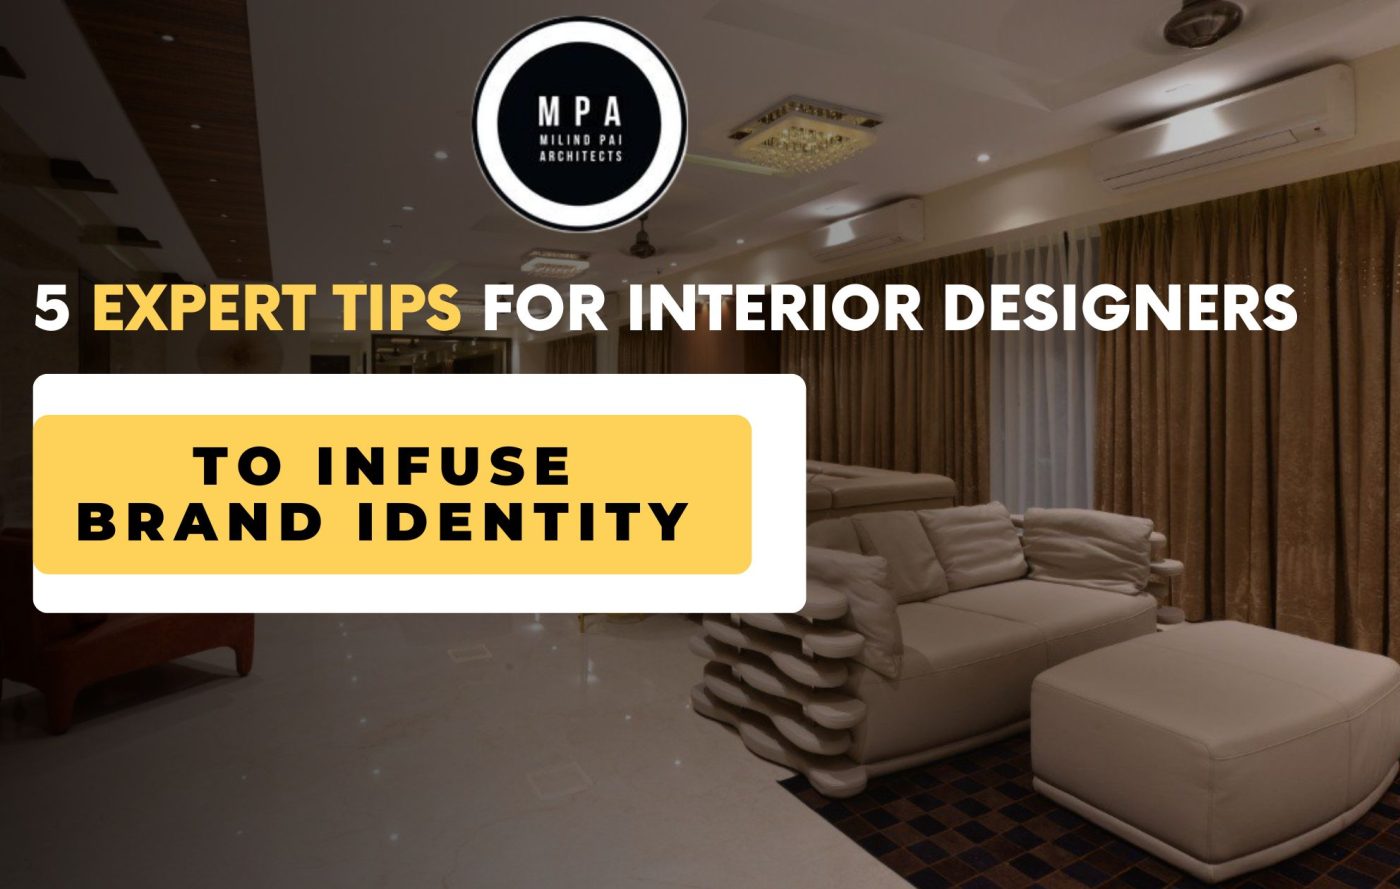 5 Expert Tips for Interior Designers to Infuse Brand Identity